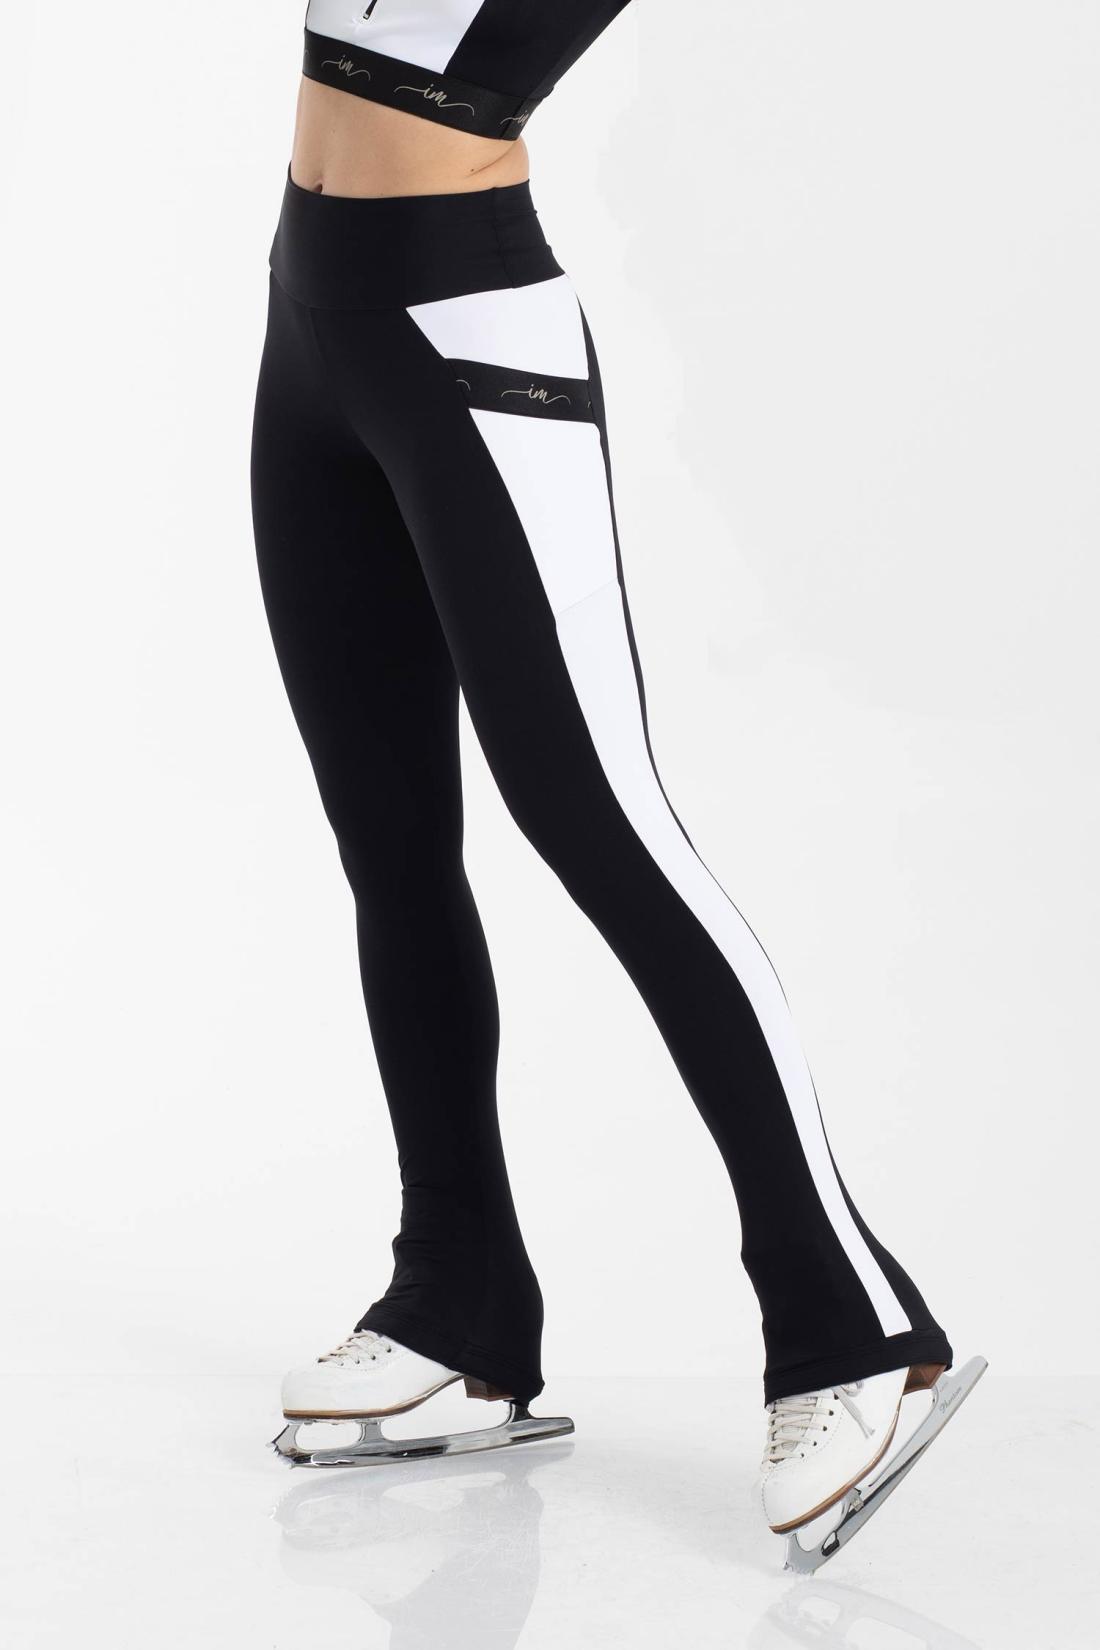 Bicolor Bea Heel cover Leggings with brushed fabric for Artistic Skating by Intermezzo